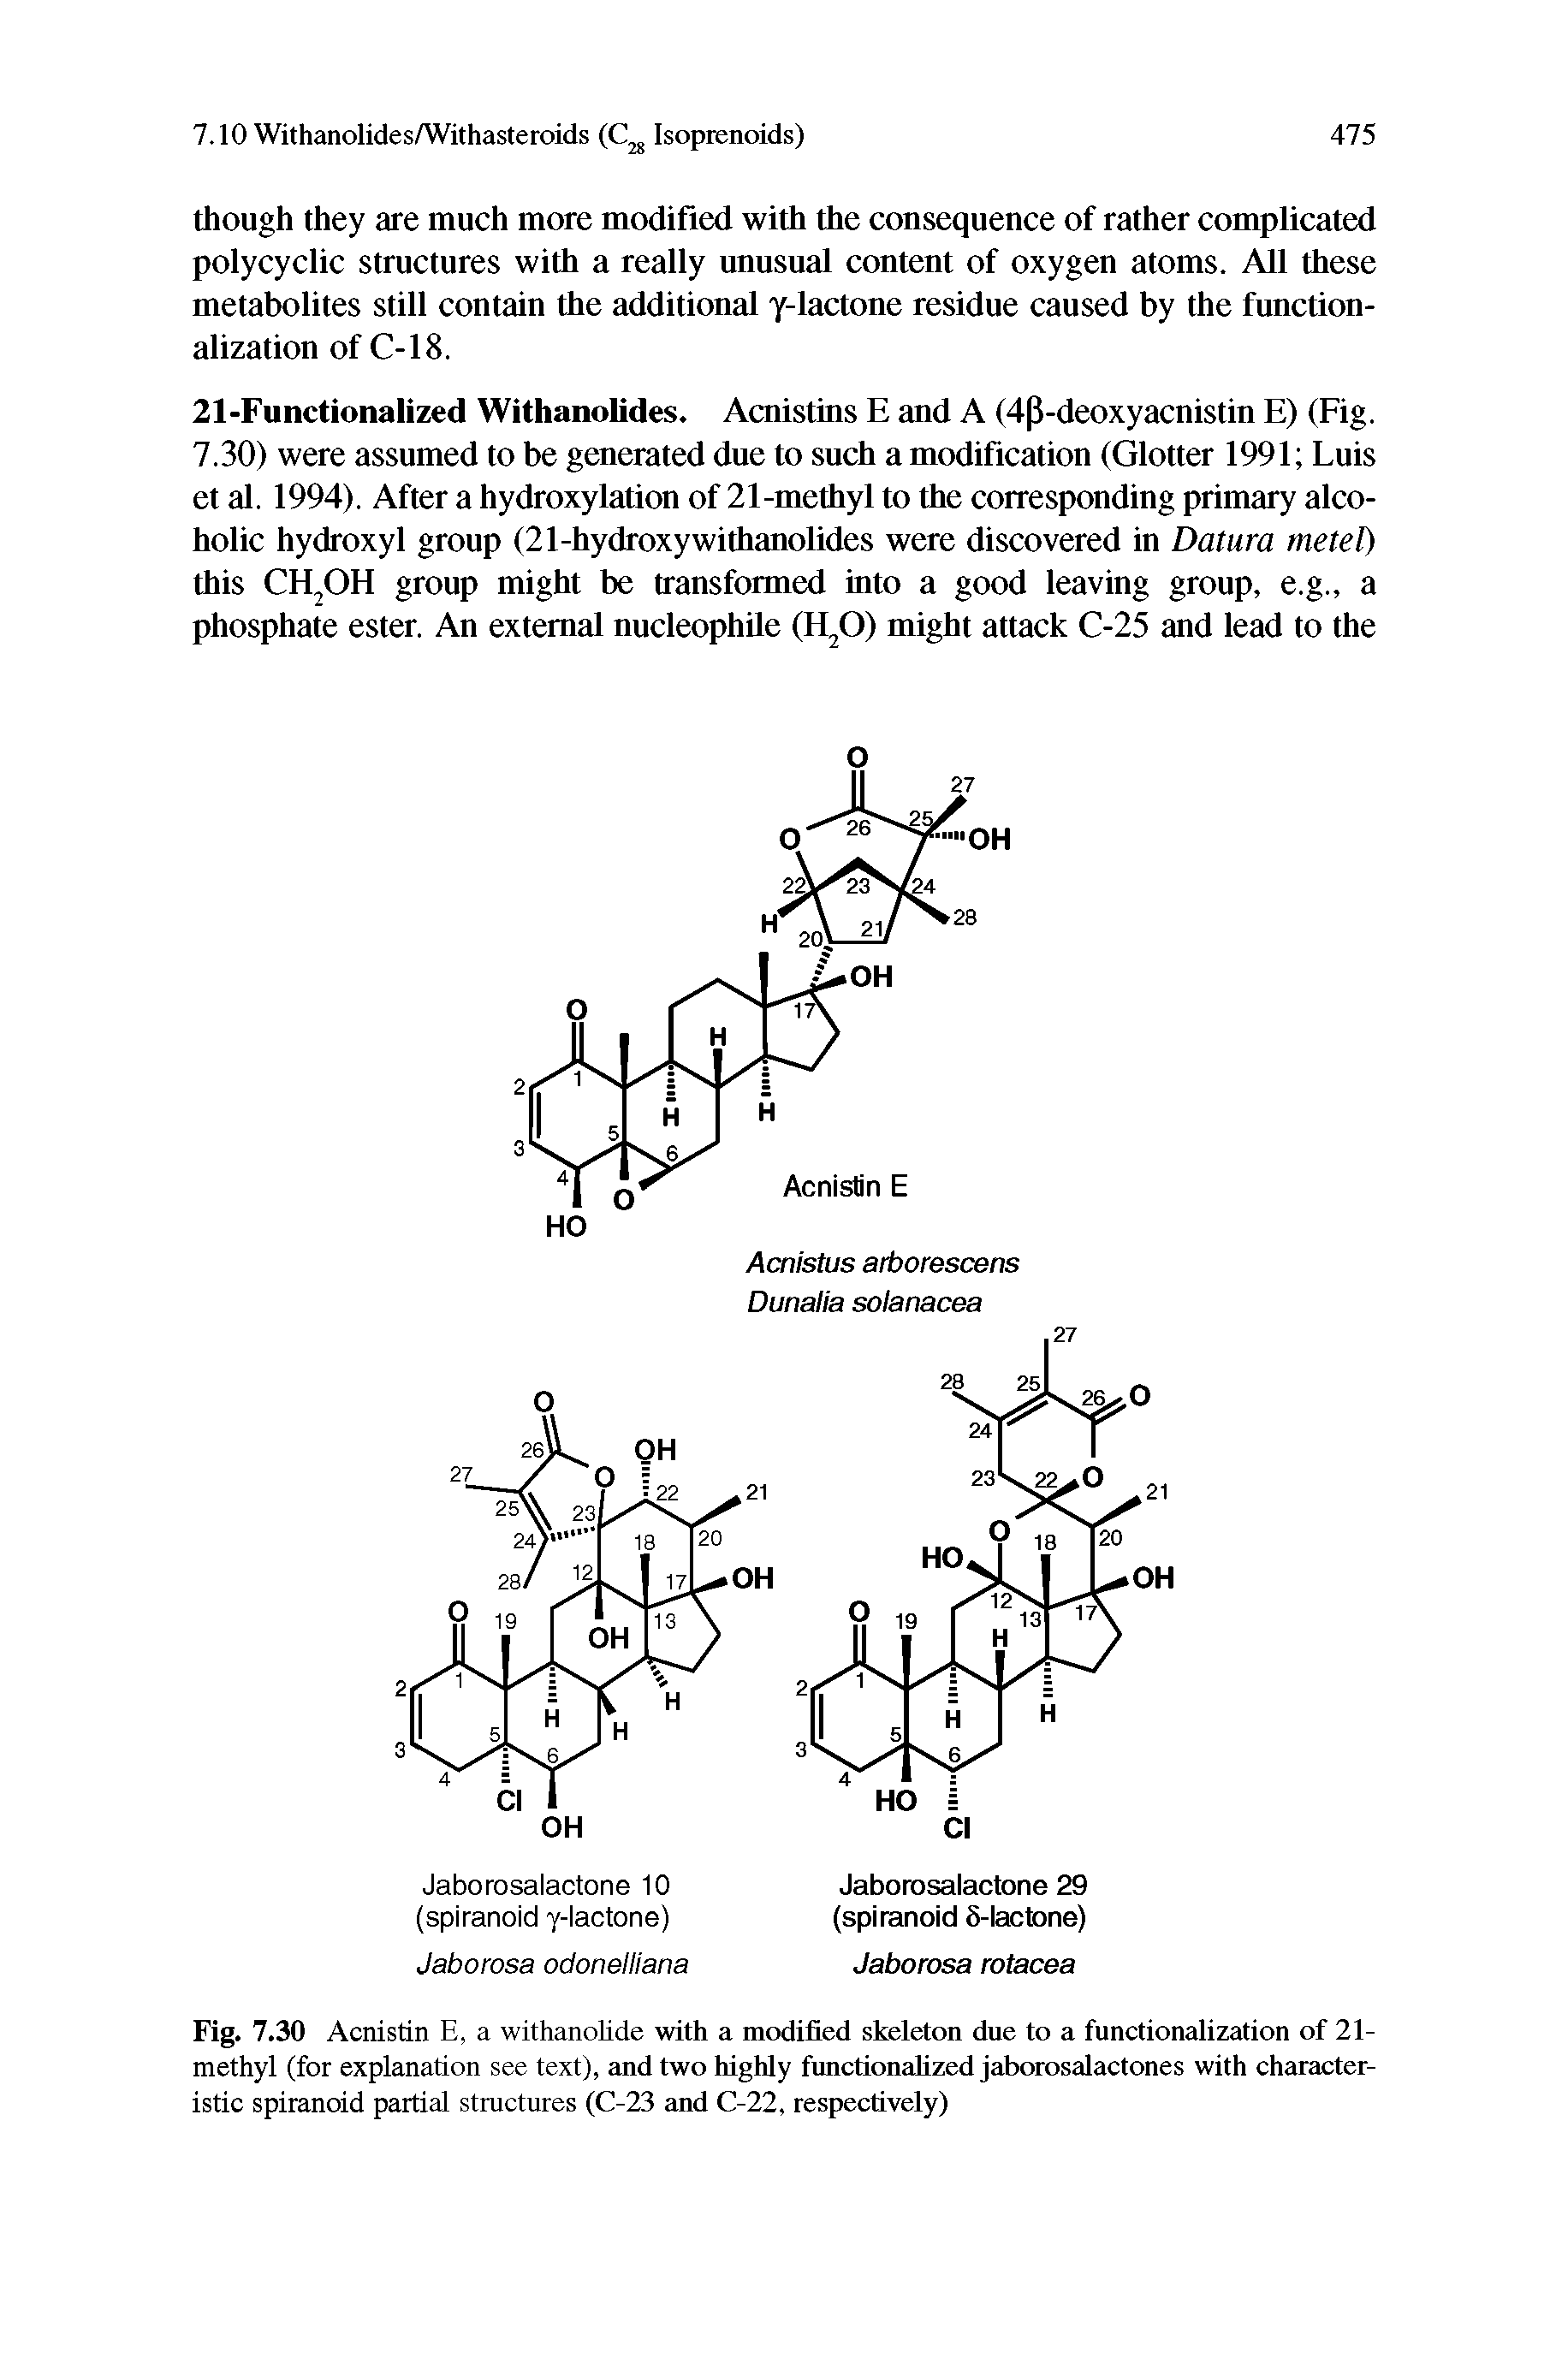 Fig. 7.30 Acnistin E, a withanolide with a modified skeleton due to a functionalization of 21-methyl (for explanation see text), and two highly functionalized jaborosalactones with characteristic spiranoid partial structures (C-23 and C-22, respectively)...